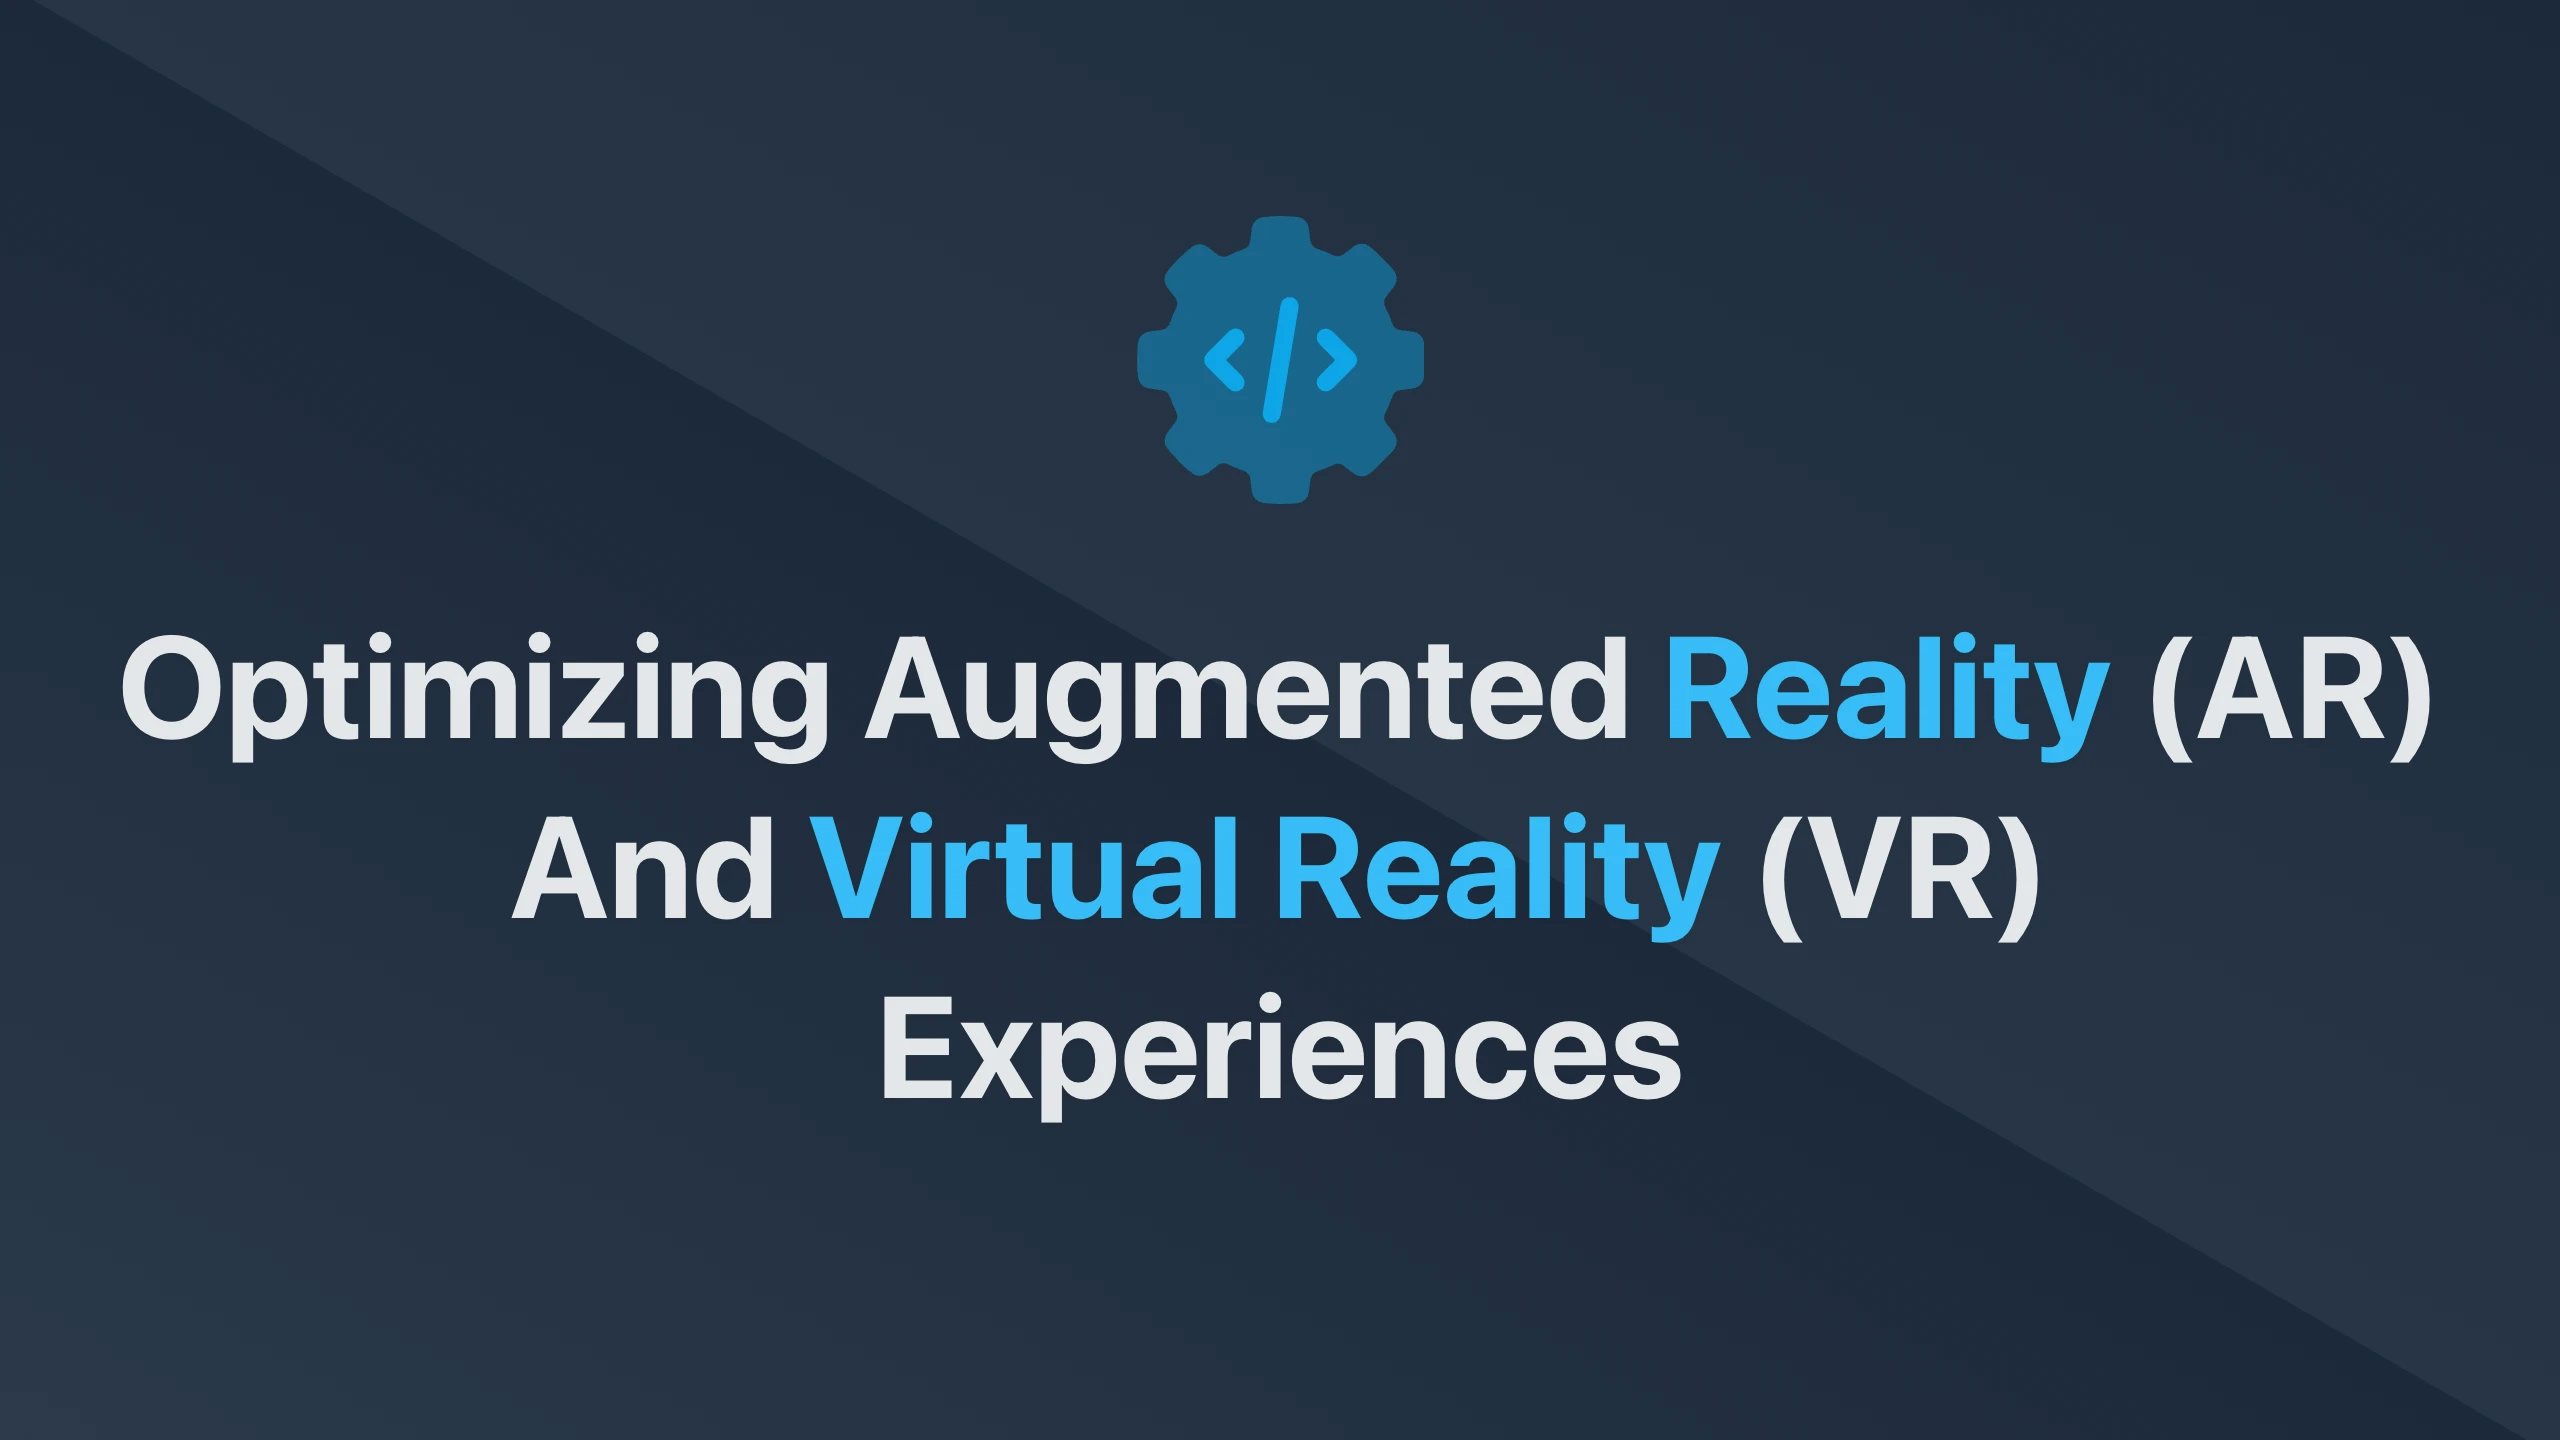 Cover Image for Optimizing Augmented Reality (AR) and Virtual Reality (VR) Experiences